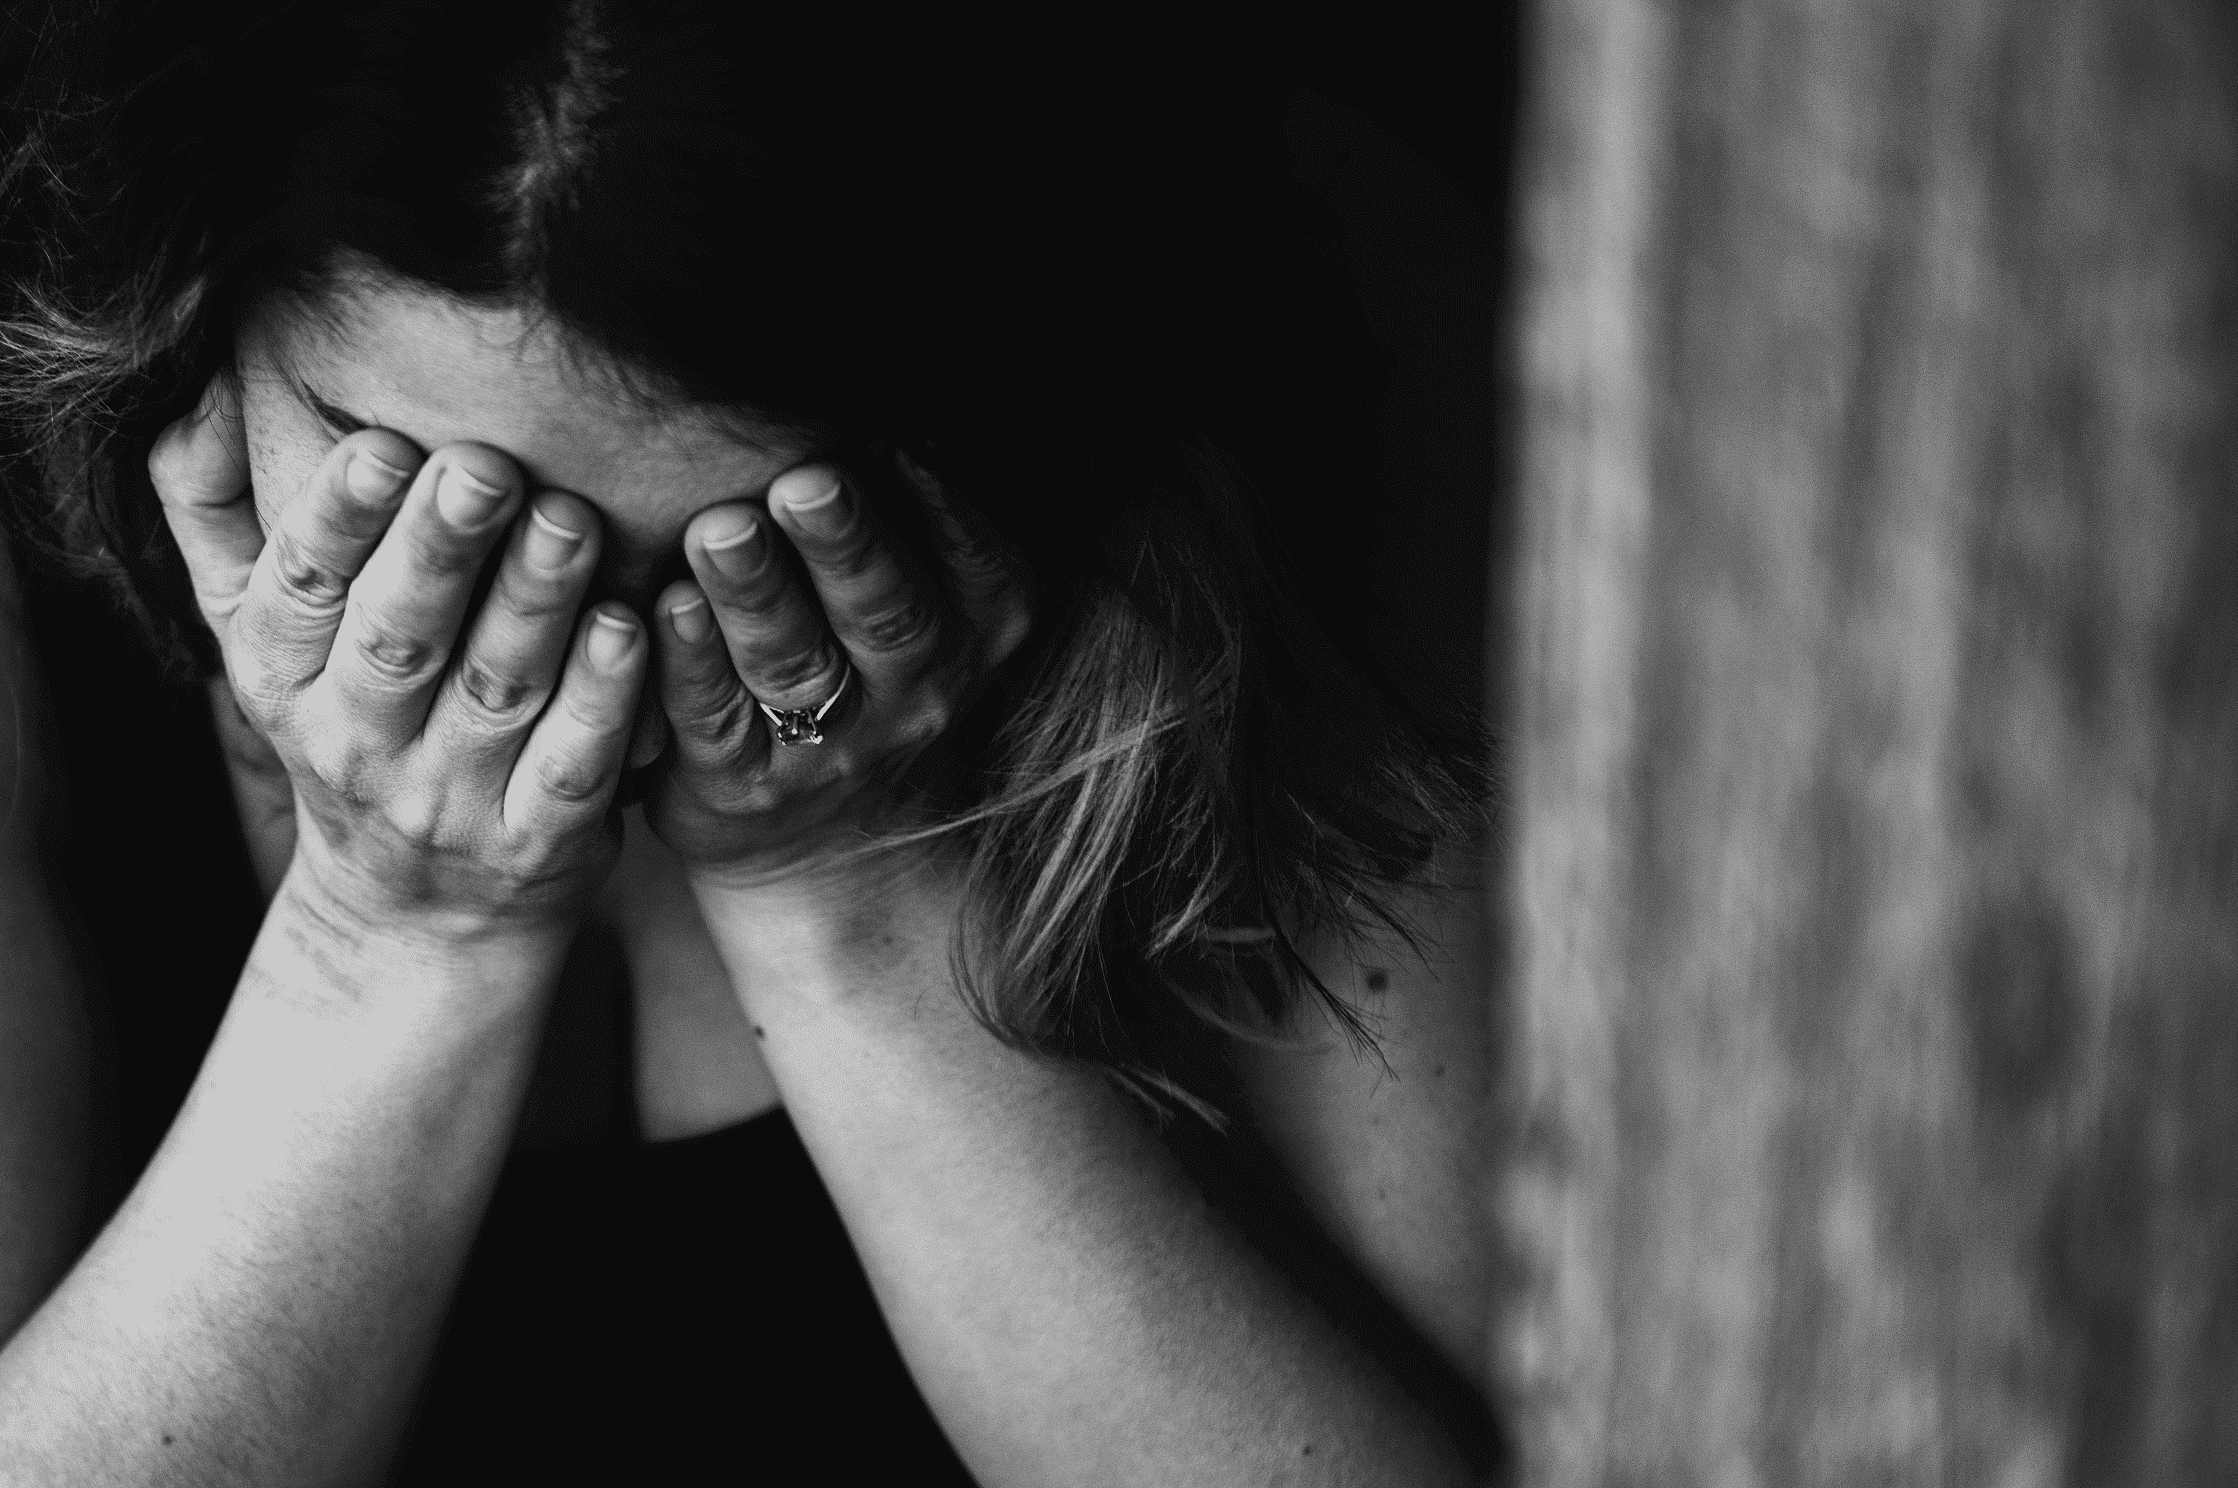 A crying woman. | Source: Pexels